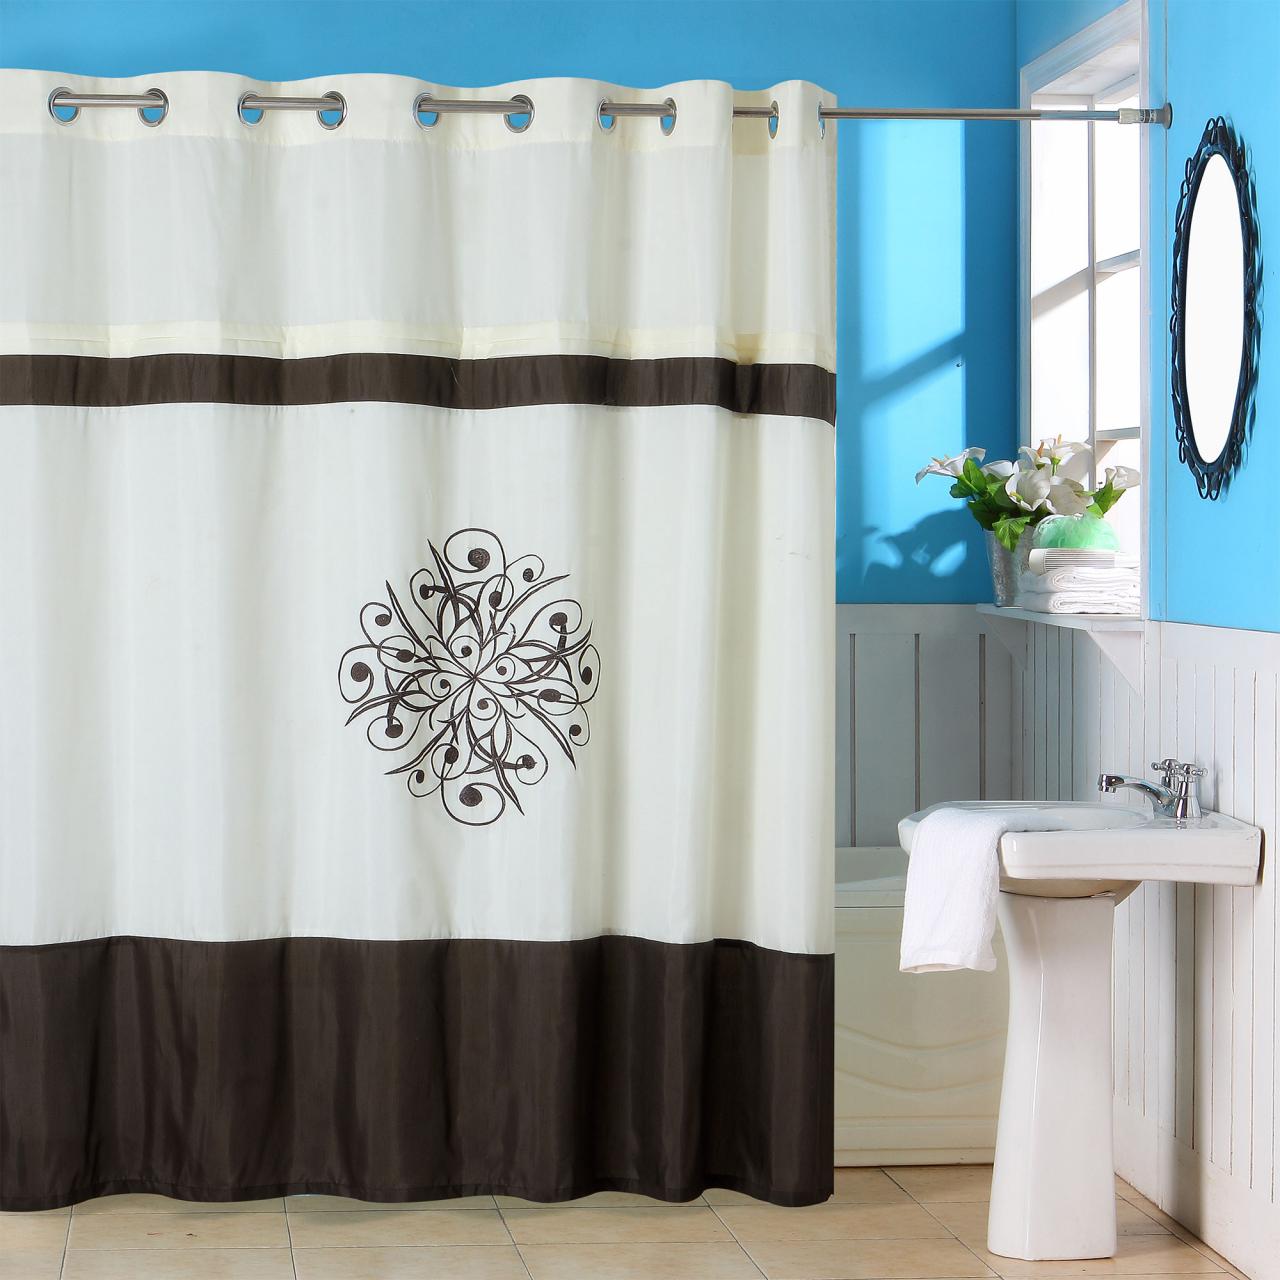 Lavish Home Lewiston Embroidered Shower Curtain w/ Grommets